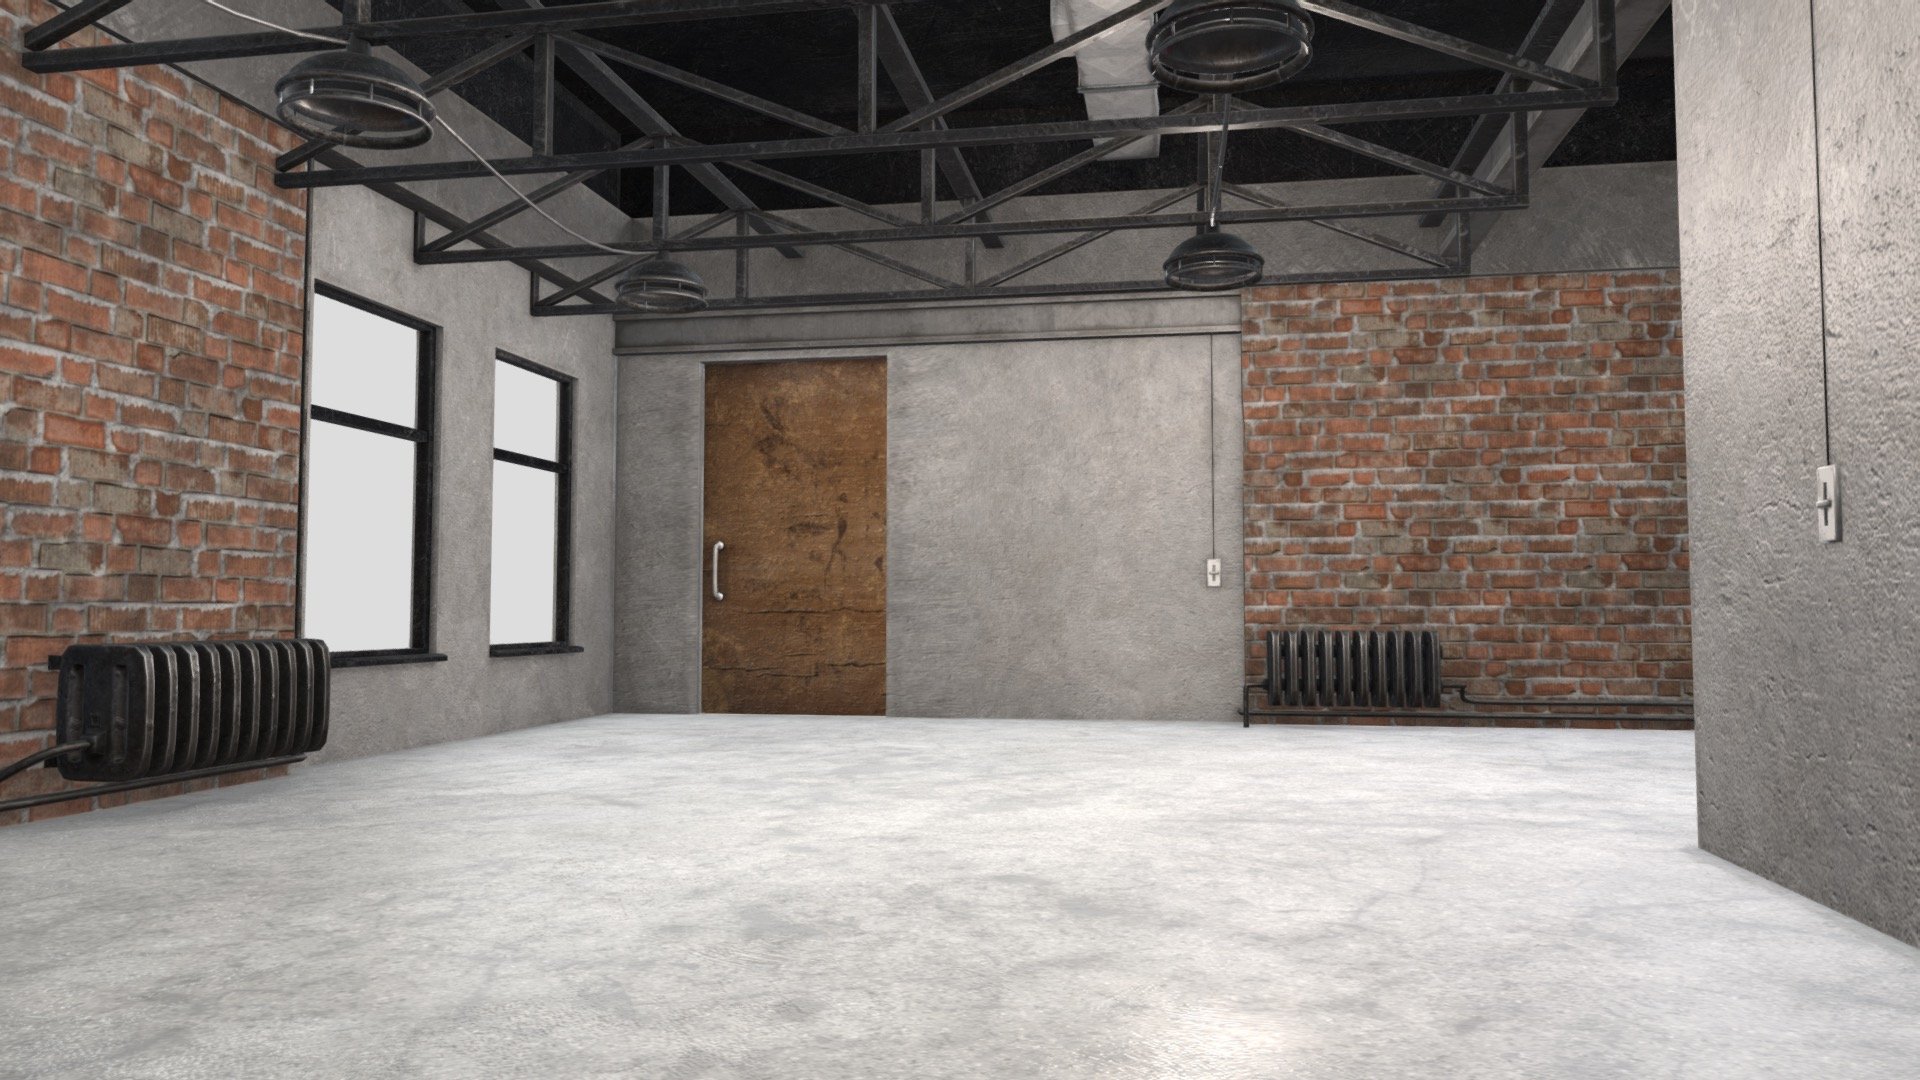 This Industrial loft is a small loft perfect as an interior scene or space. The mesh is detailed on all sides of the interior. There are no glass windows in place and need to be added in. The space is NOT Furnished. For best lighting results use a strong outdoor HDRI facing inward towards the windows.

This includes:

The mesh
8K and 4K Texture Sets (albedo, Metallic, Roughness, Normal, Height)
The mesh is UV Unwrapped with vertex colors and can easily be retextured 3d model